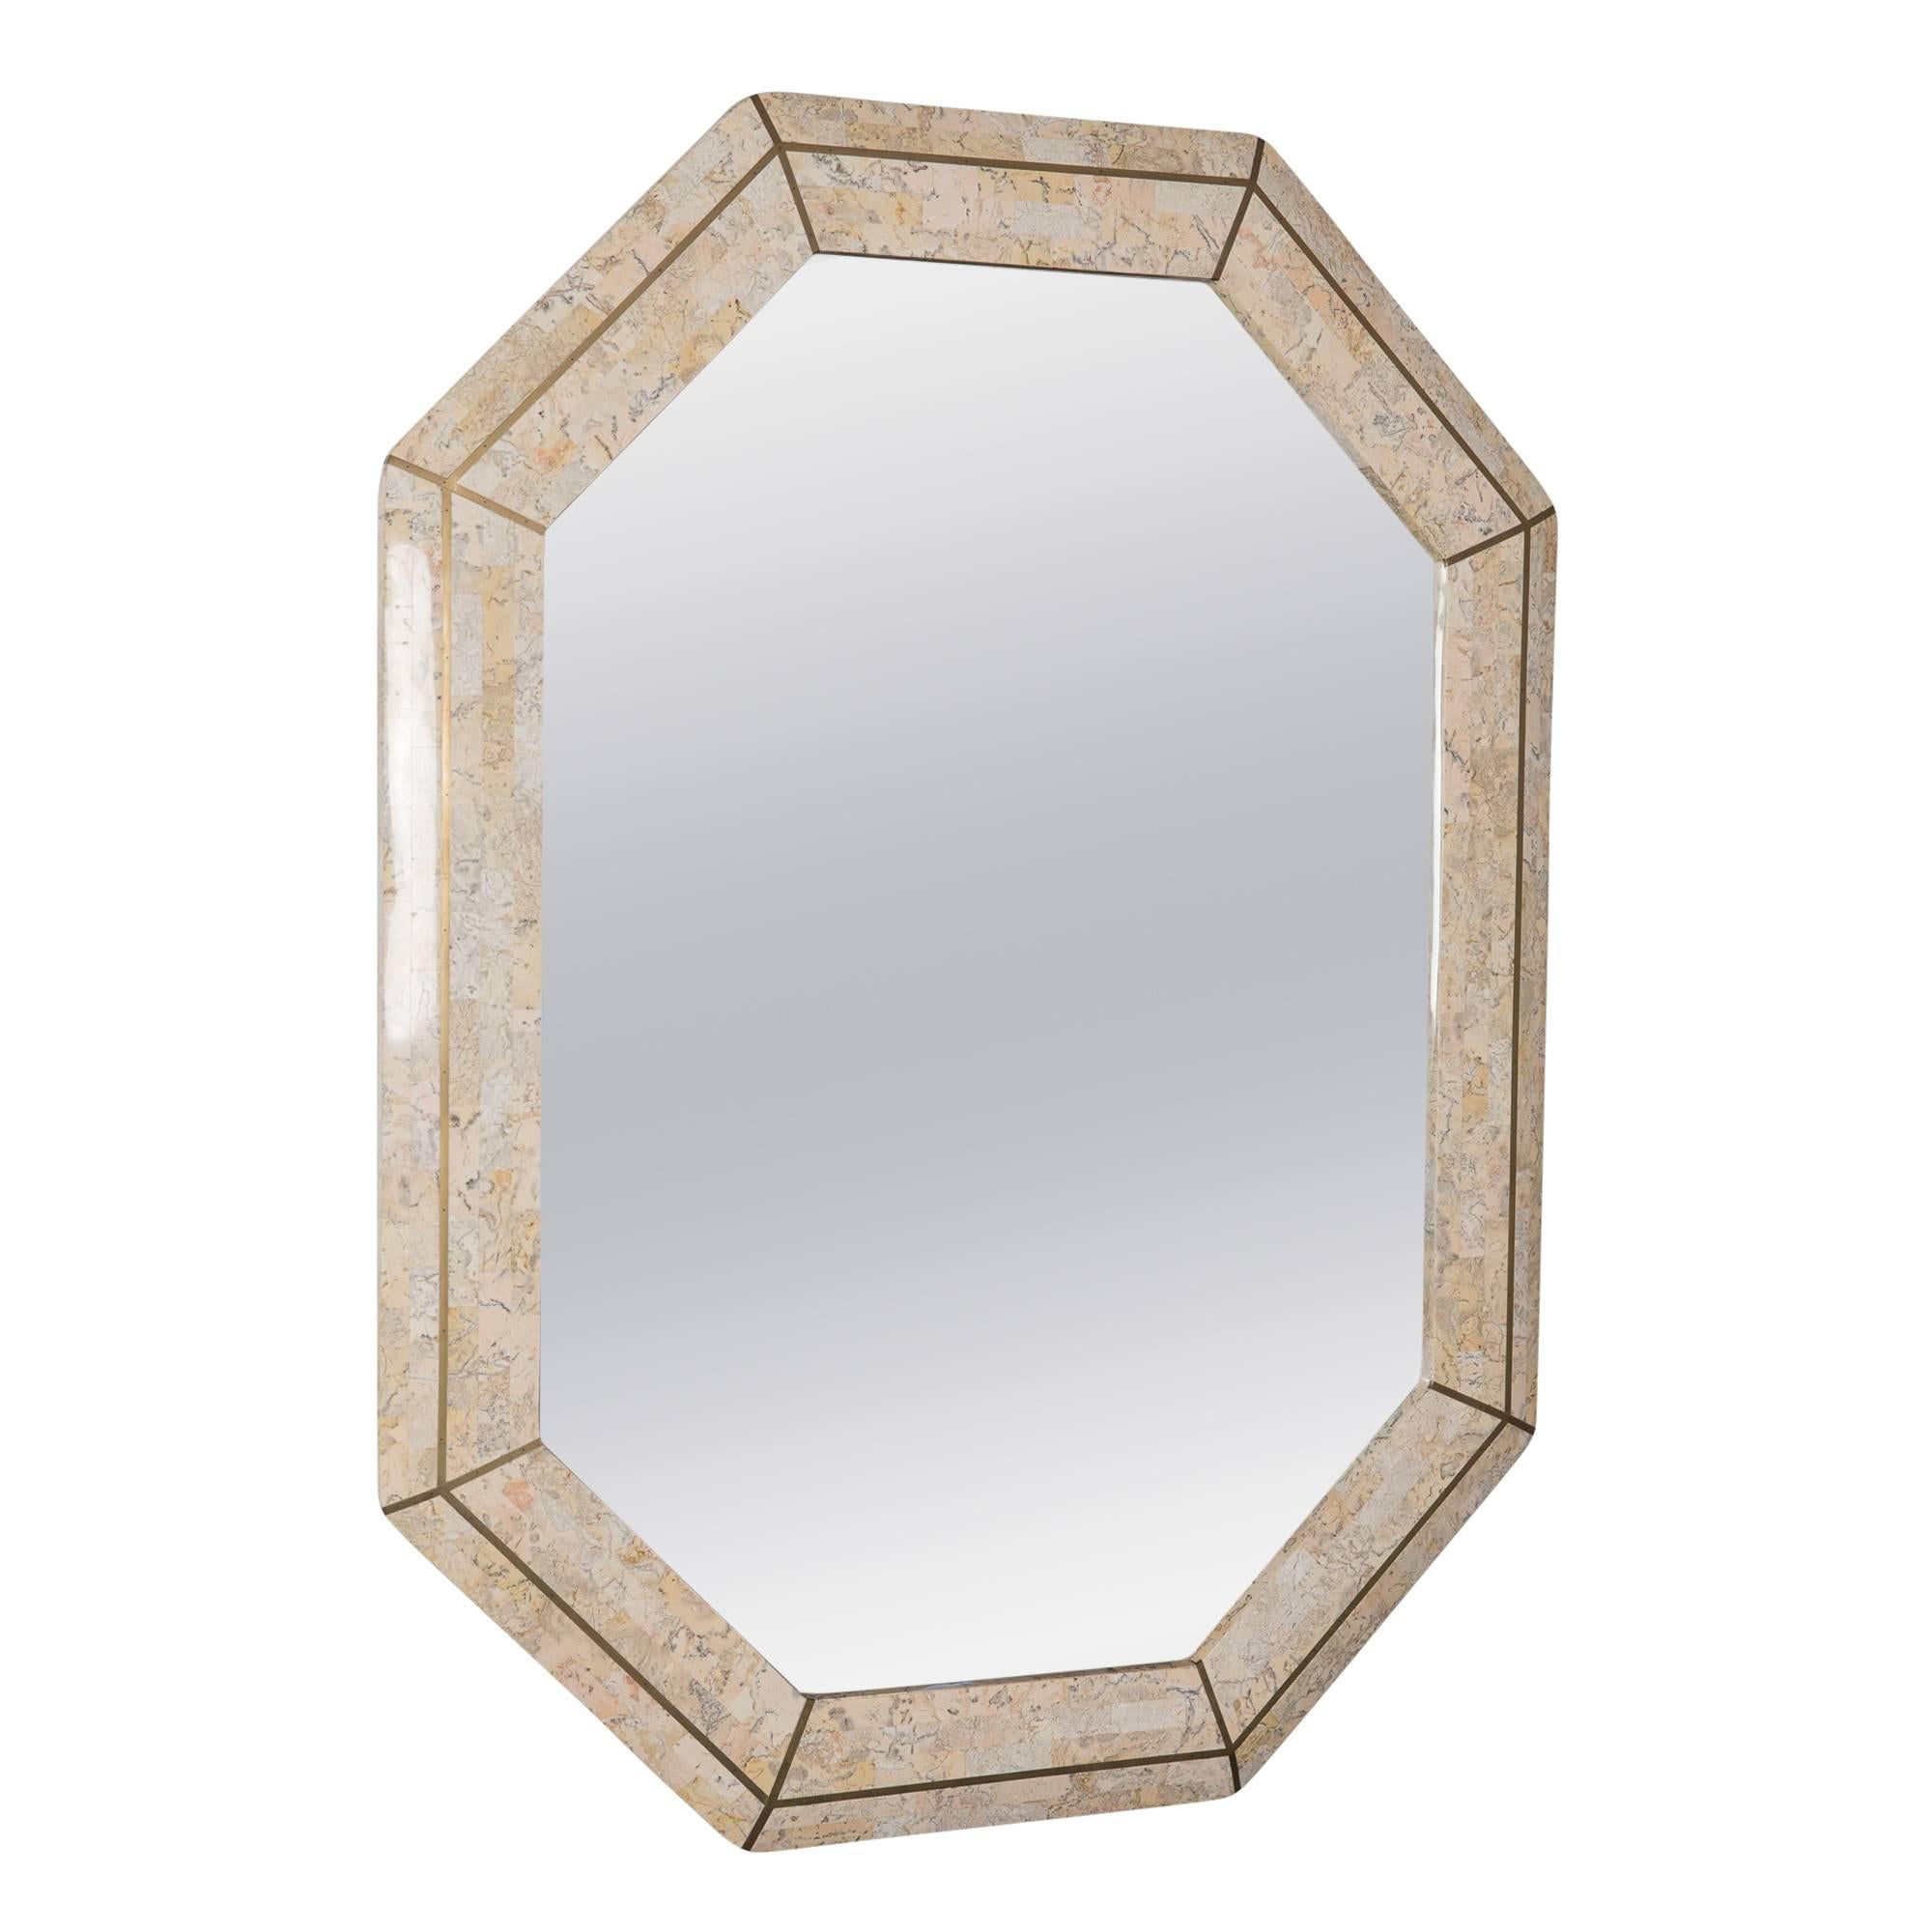 Tessellated stone frame mirror, octagonal form, with brass banded inlay, by Maitland Smith, England 1970s. Manufacturer label affixed to back. Measures: Height 40 1/4 in, width 30 1/4 in, depth 1 1/2 in. 